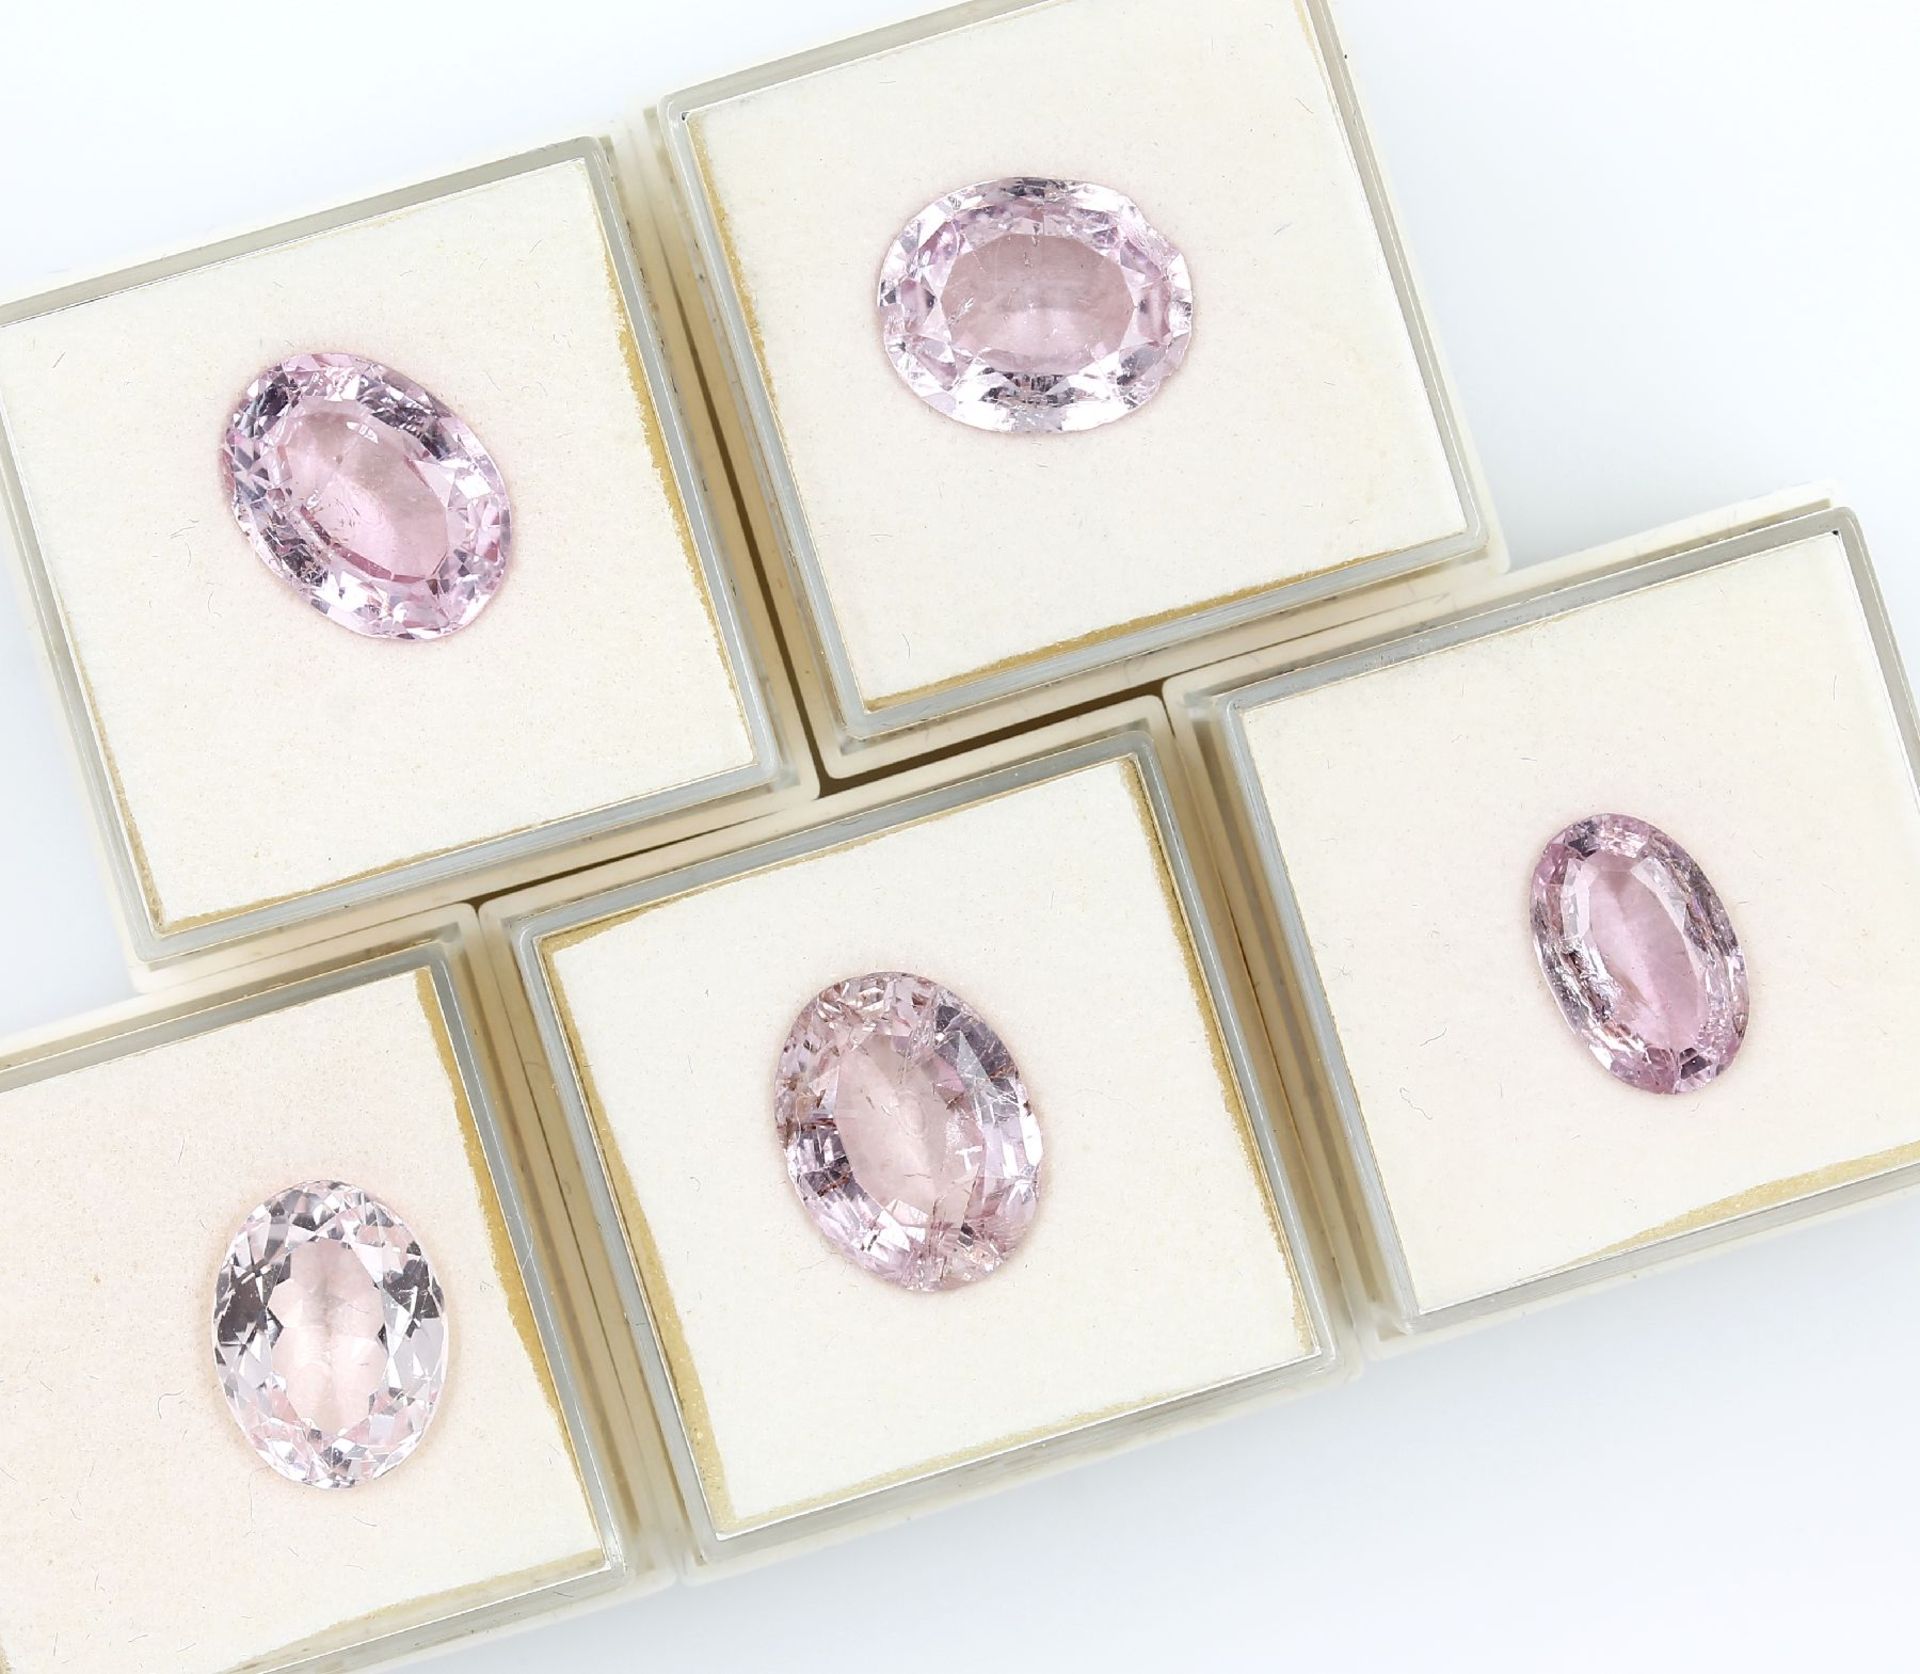 Lot 5 loose kunzites , total approx. 23.3 ct, oval bevelled, in different sizes Valuation Price: